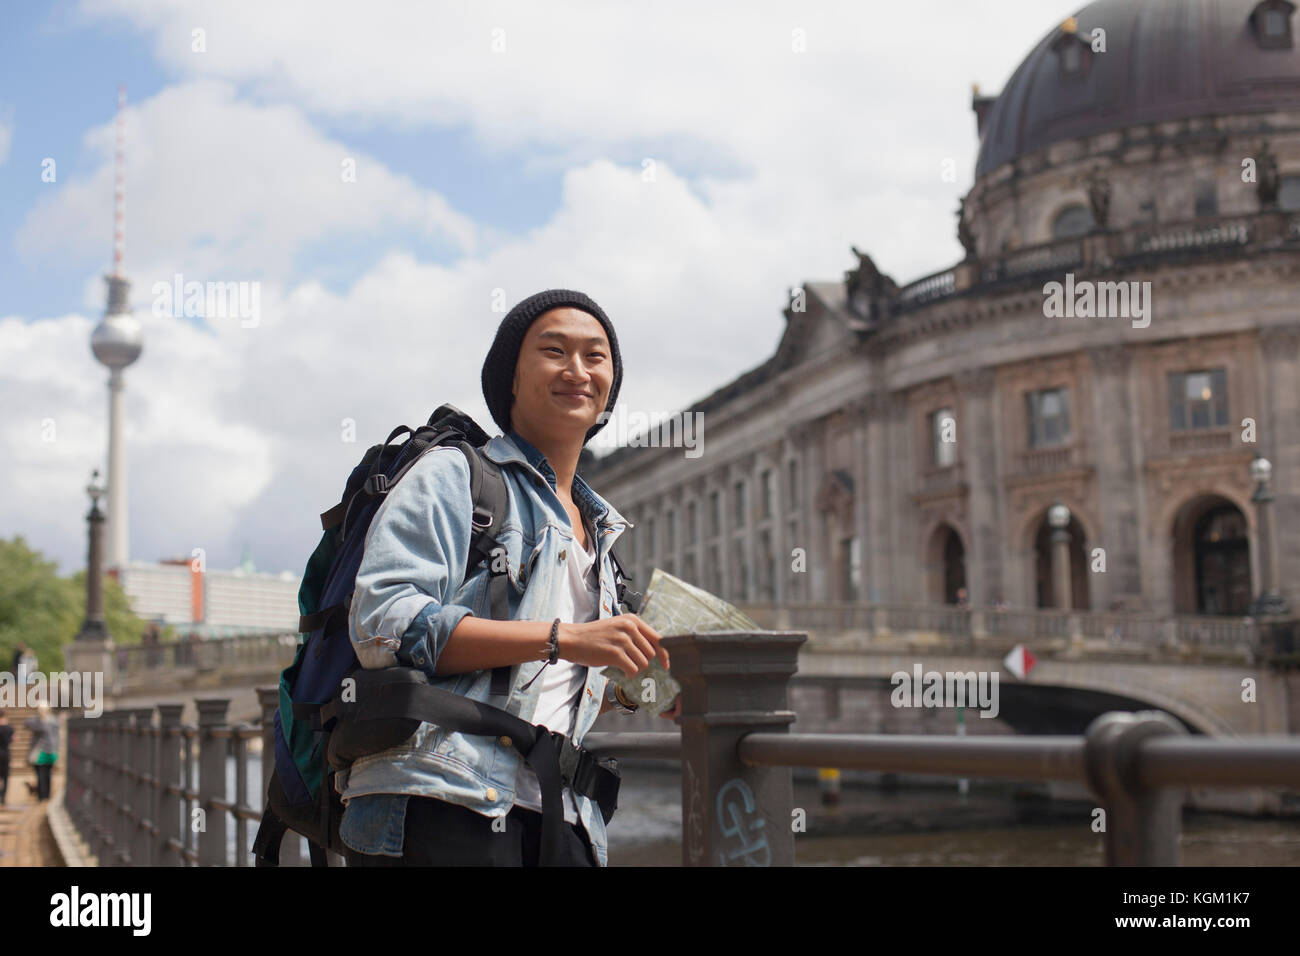 Smiling young male tourist standing with map by railing against Bode Museum, Berlin, Germany Stock Photo